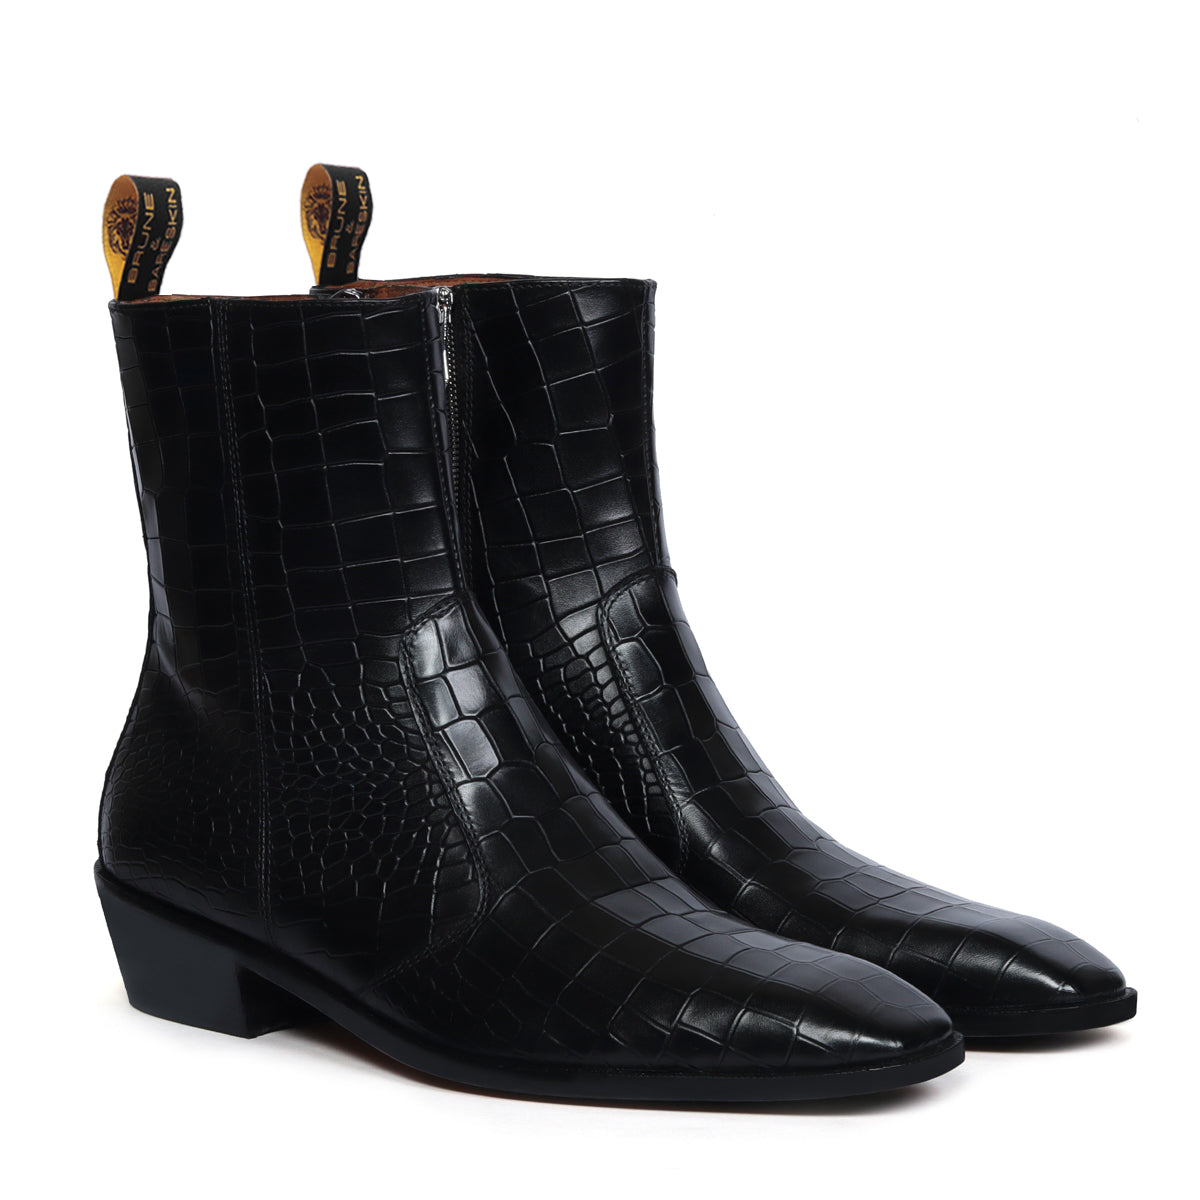 Stitched Black Chelsea Boot with Cuban Heel Zip Closure Deep Cut Leather By Brune & Bareskin